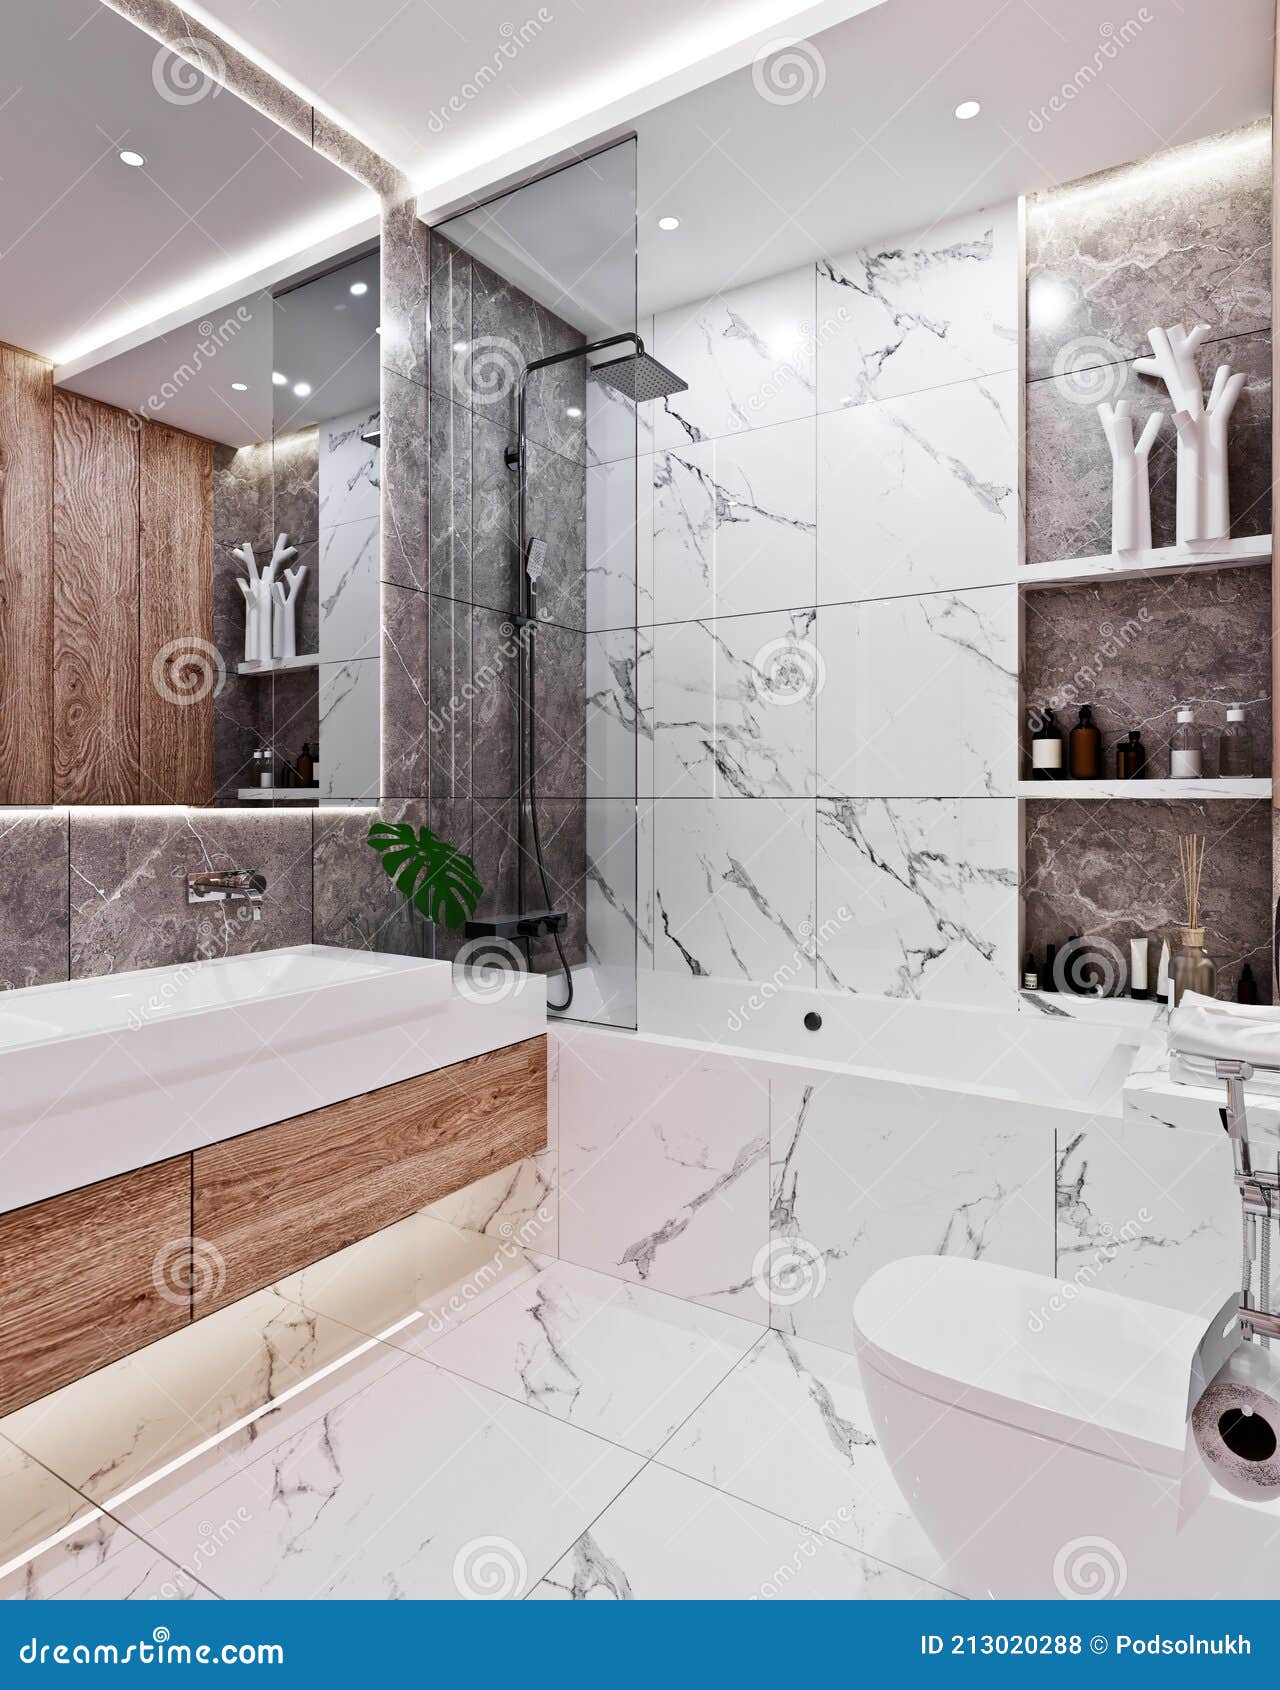 Modern Bathroom Design with Tiles Marble and Wood Stock Photo - Image ...